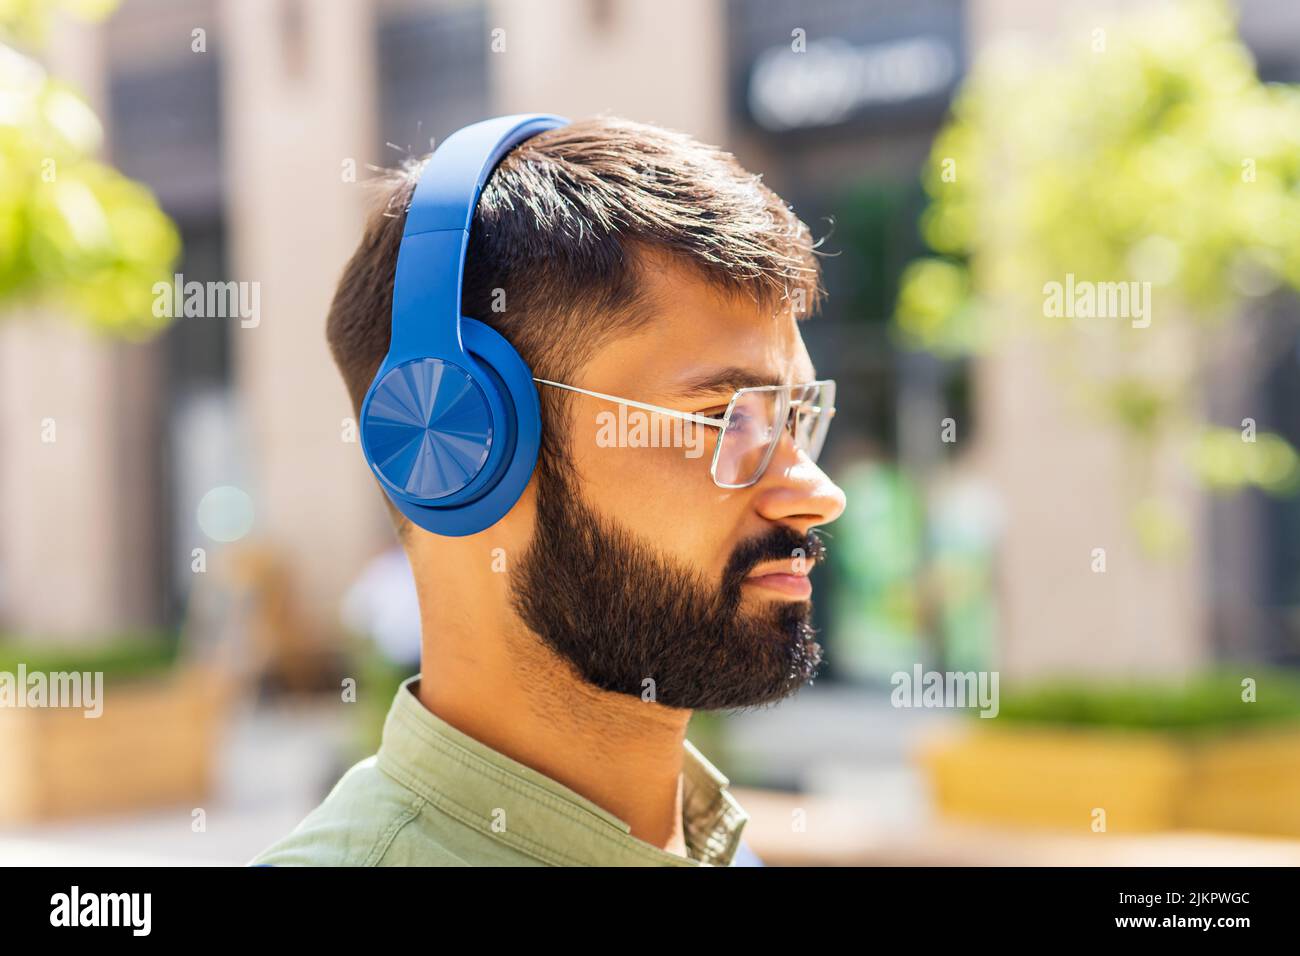 indian student with blue headset and backpack well looking at sunny day Stock Photo